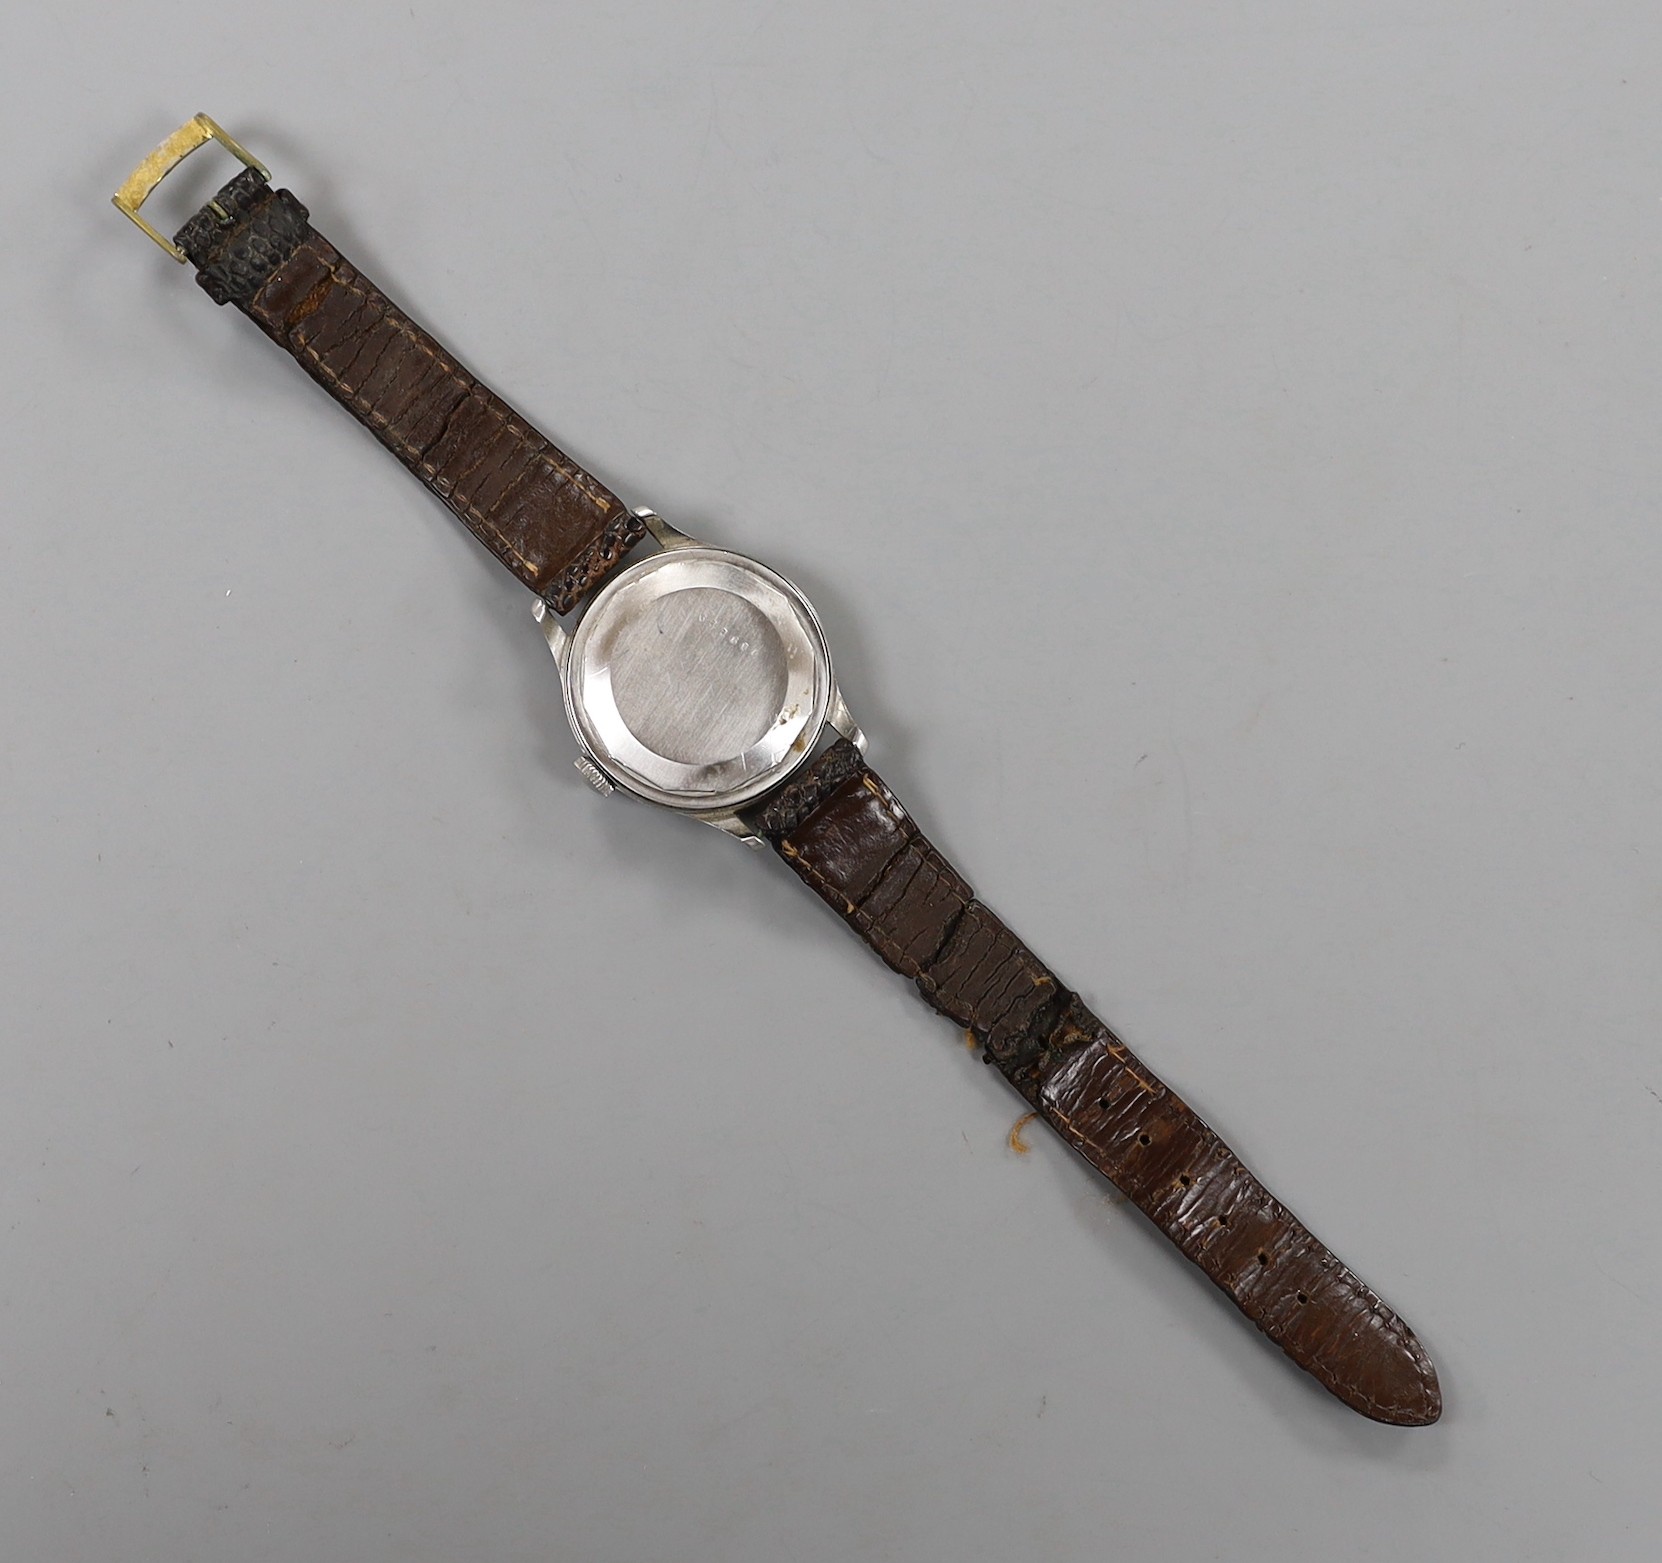 A gentleman's stainless steel Jaeger LeCoultre manual wind wrist watch, with Arabic dial and subsidiary seconds, on associated leather strap.